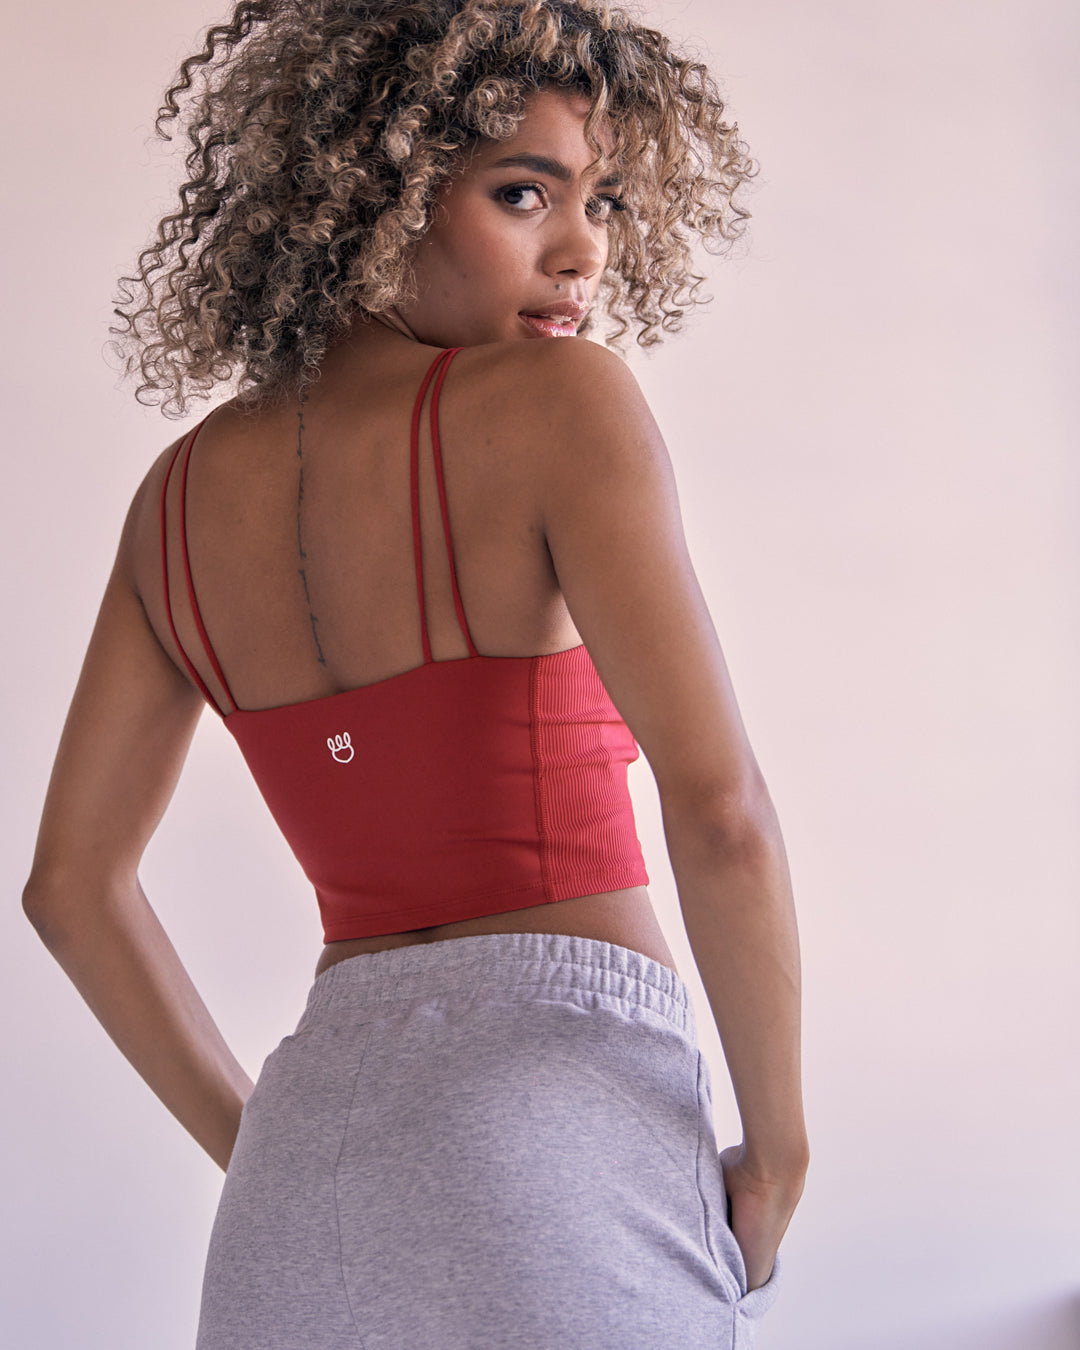 KADYLUXE® Countess Cami bra in cardinal red back side view.